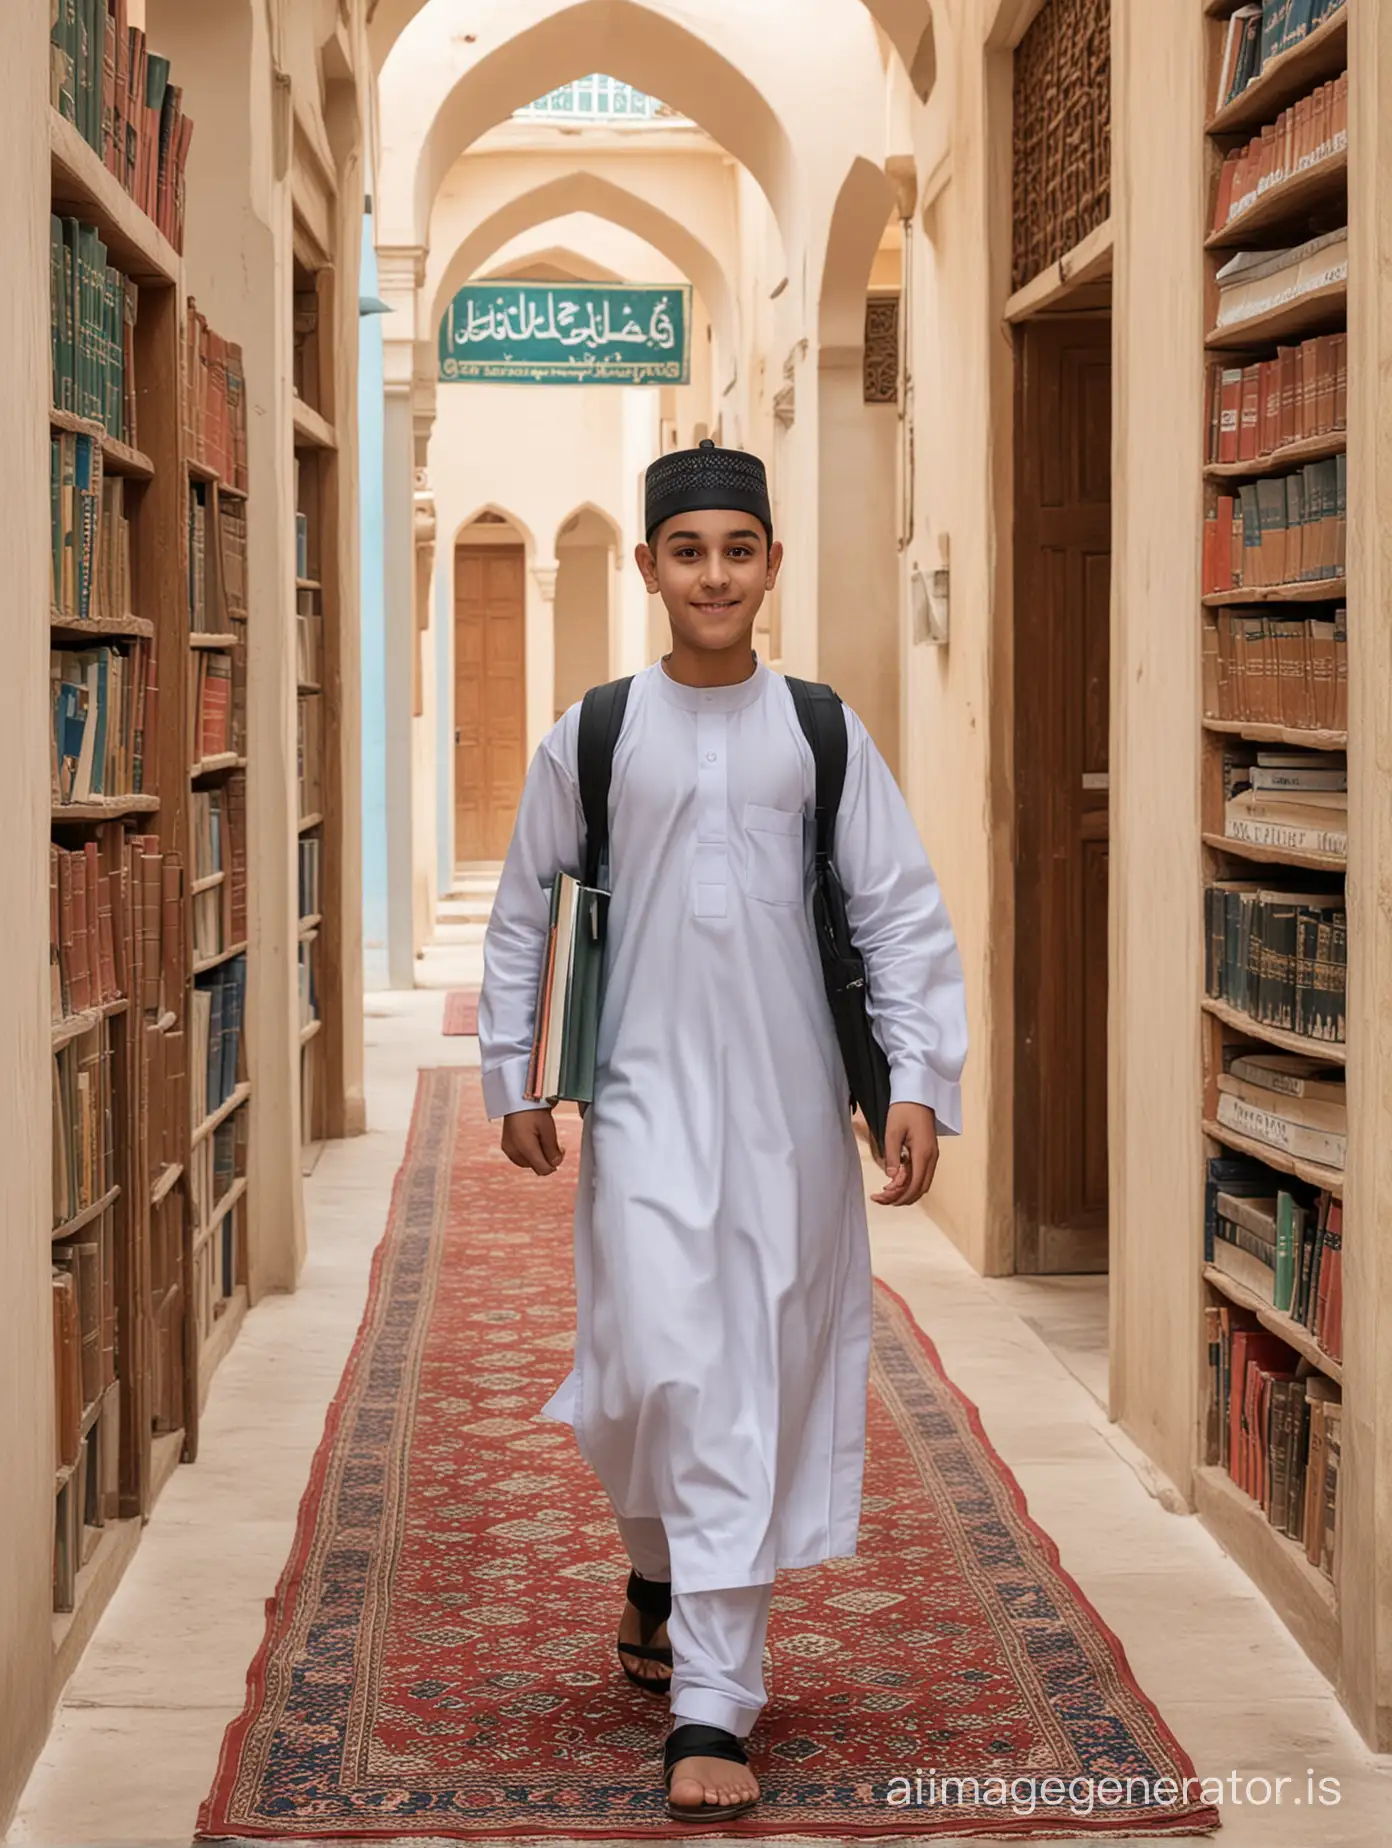 A madrasa student wearing a jubba cap is going to the madrasa with books